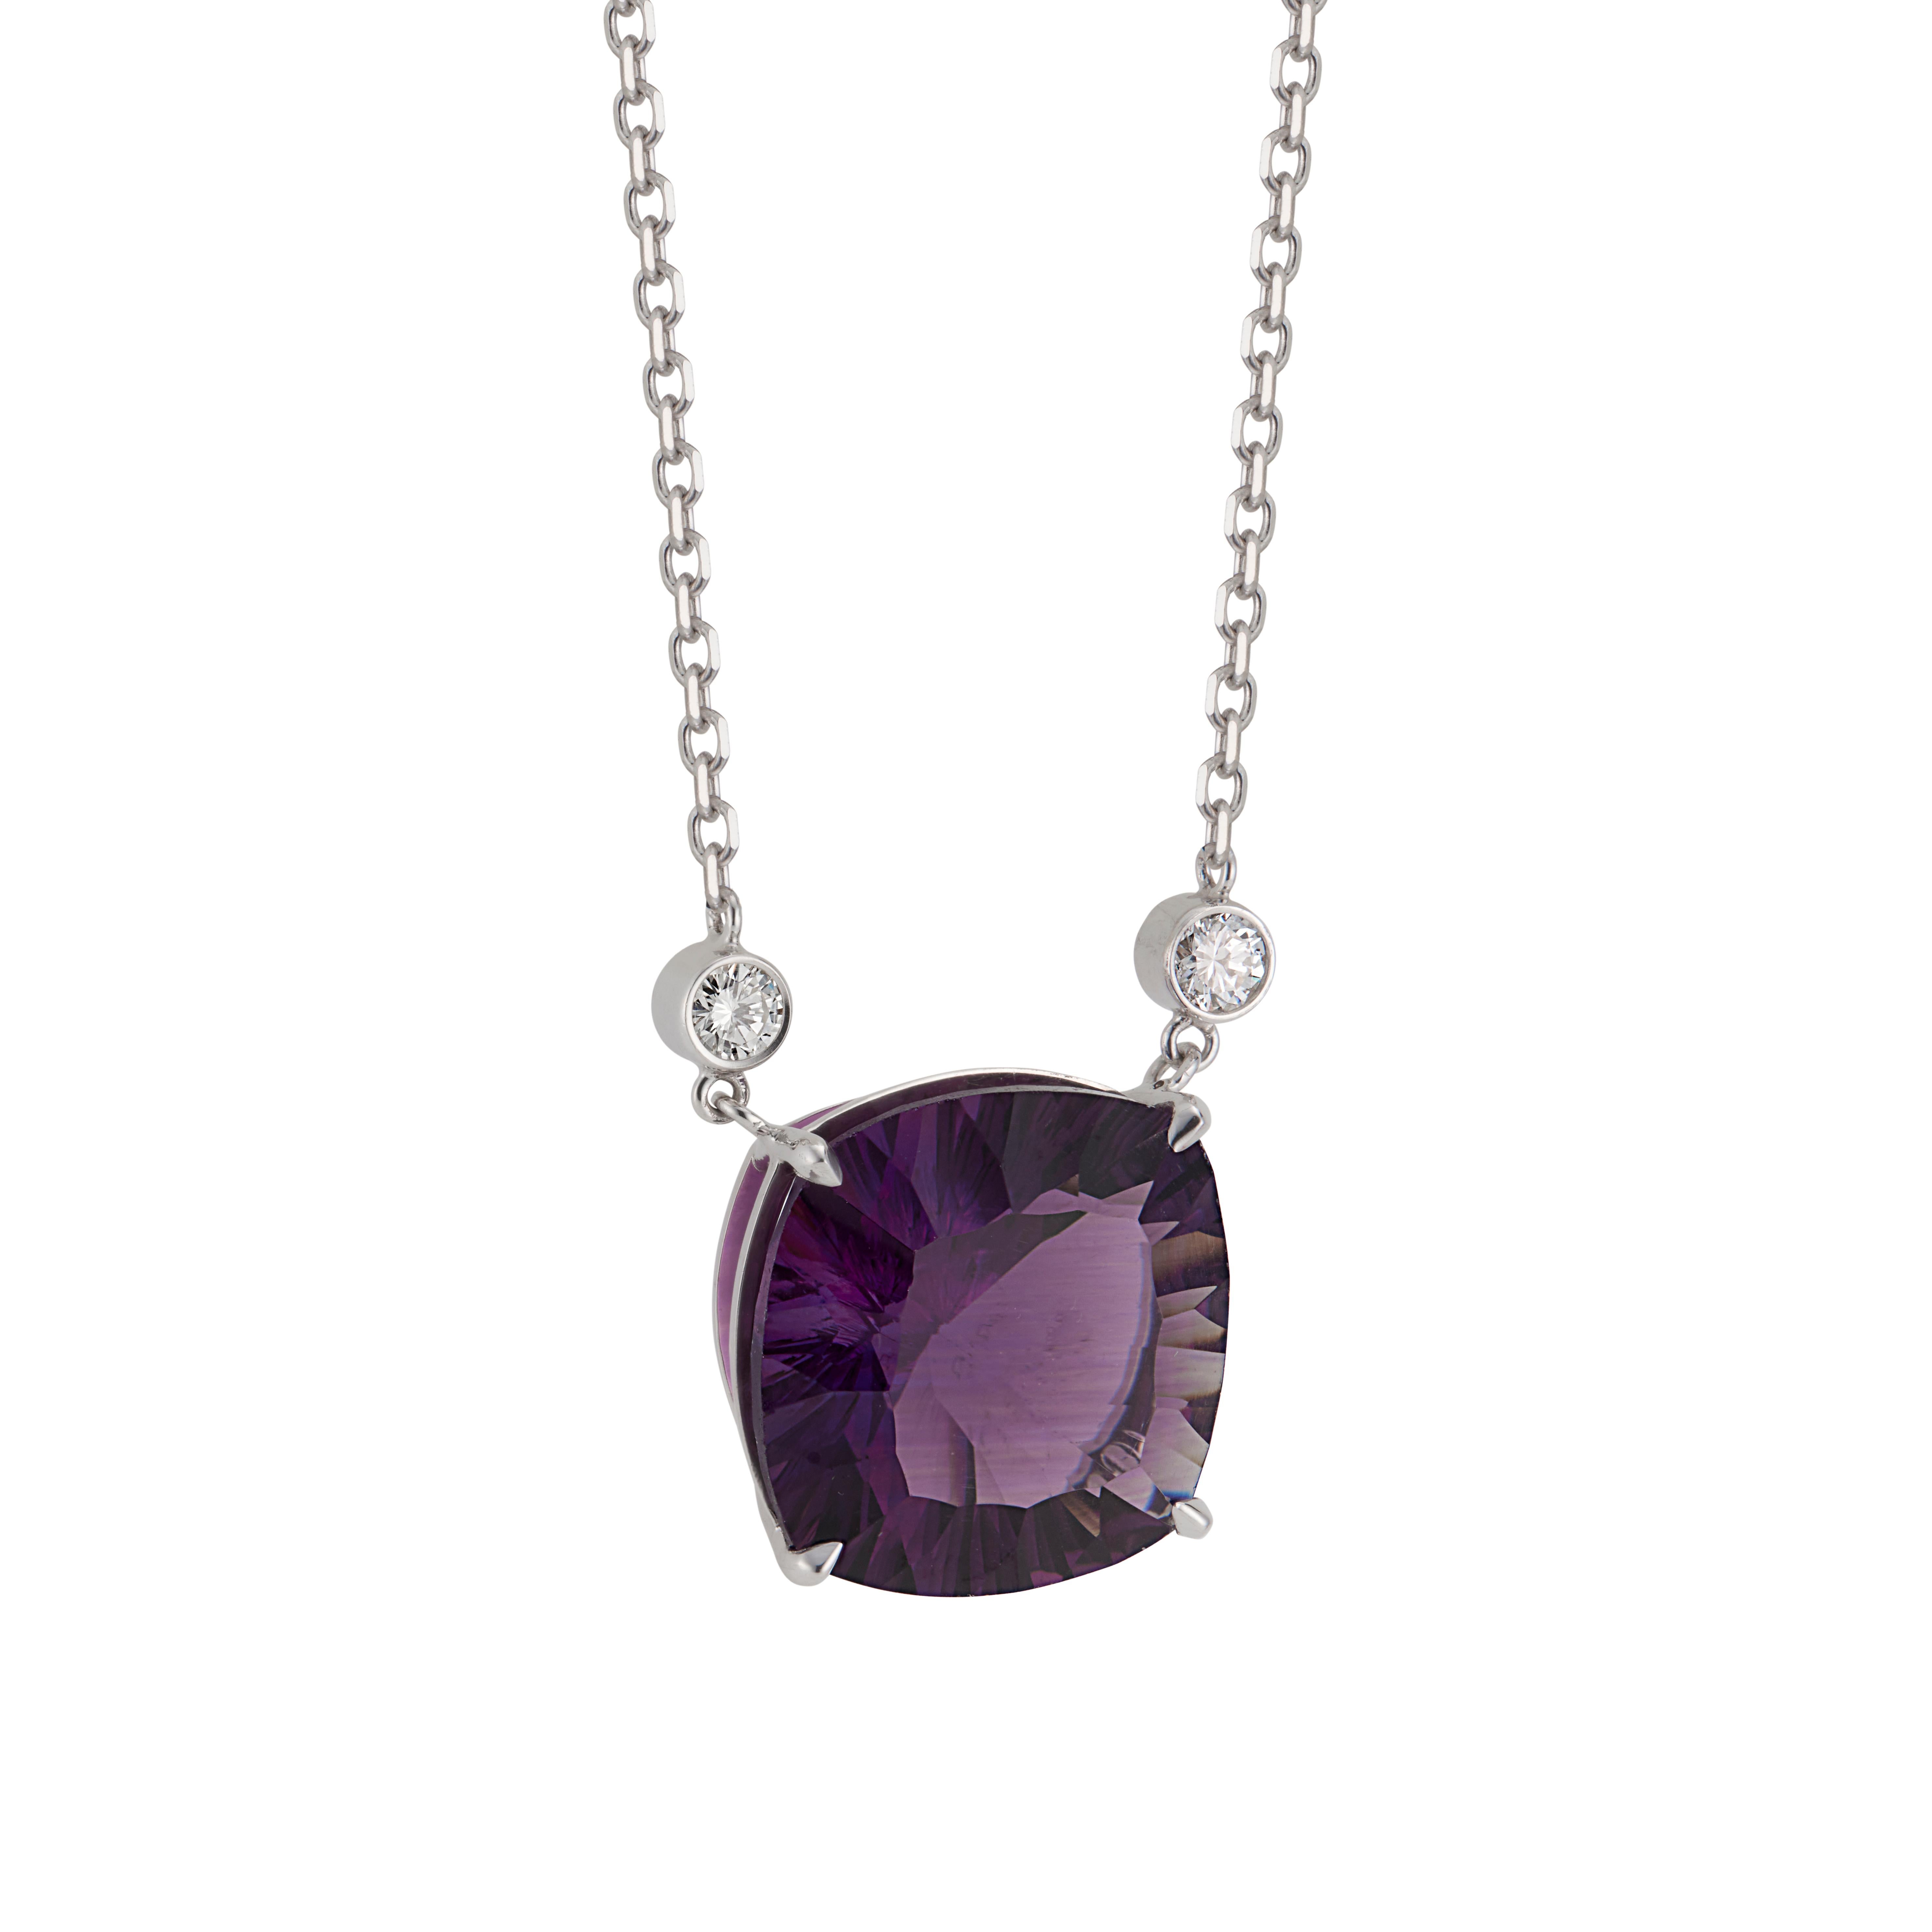 Amethyst and diamond pendant necklace. 10.51ct Natural untreated cushion cut amethyst, set in 14k white gold setting with 2 round brilliant cut accent diamonds. Designed and crafted in the Peter Suchy Workshop. 19 inch 14k white gold chain. 

1